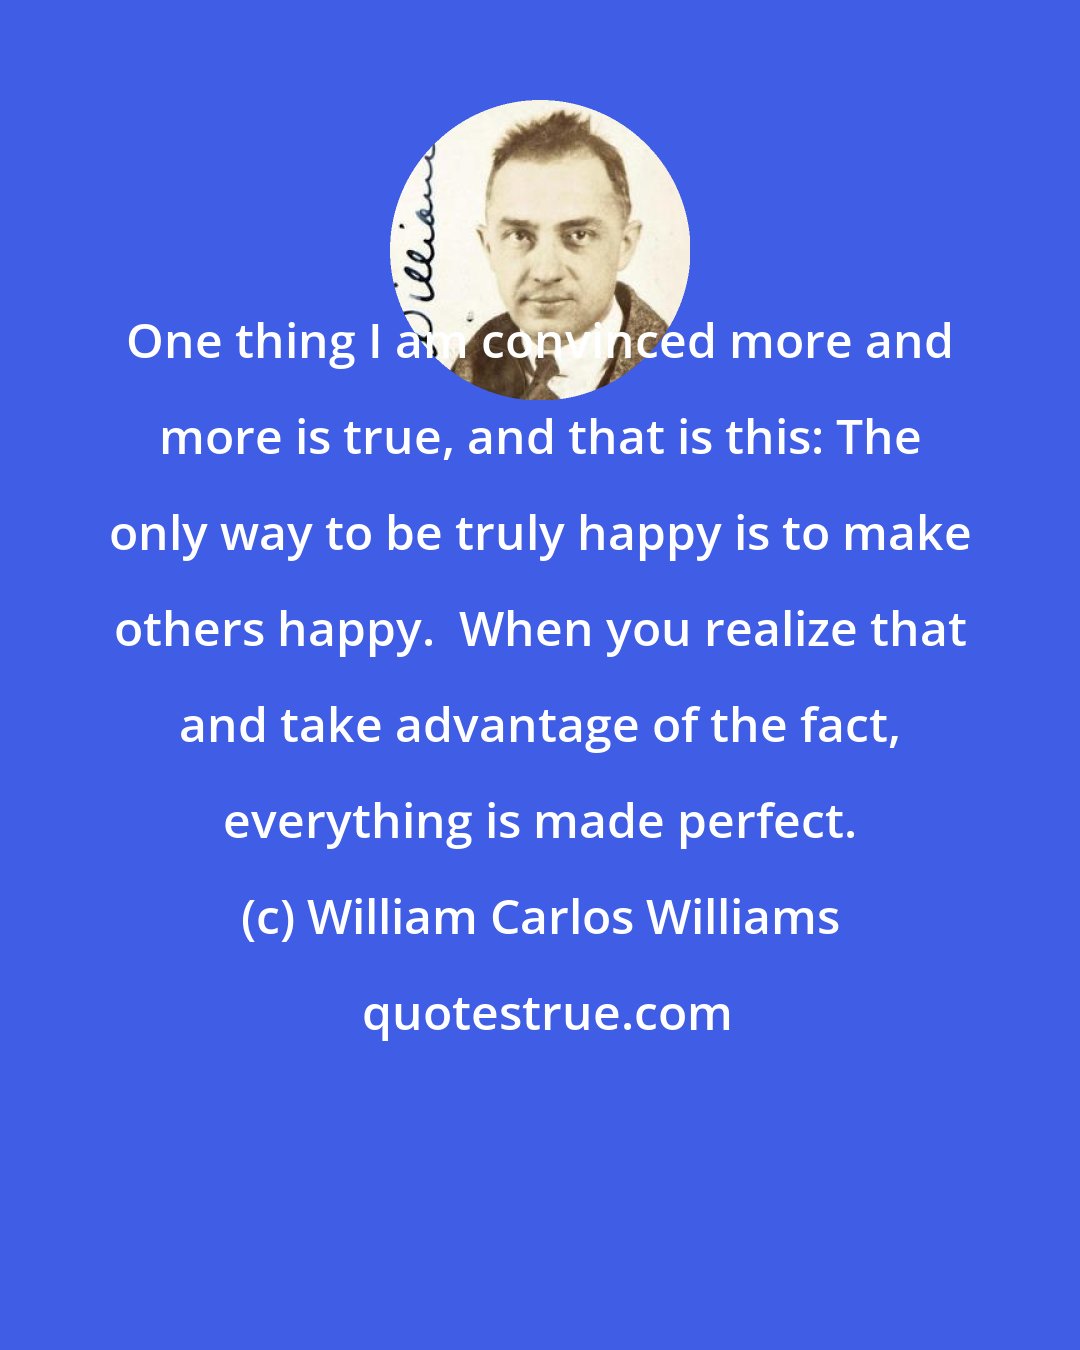 William Carlos Williams: One thing I am convinced more and more is true, and that is this: The only way to be truly happy is to make others happy.  When you realize that and take advantage of the fact, everything is made perfect.